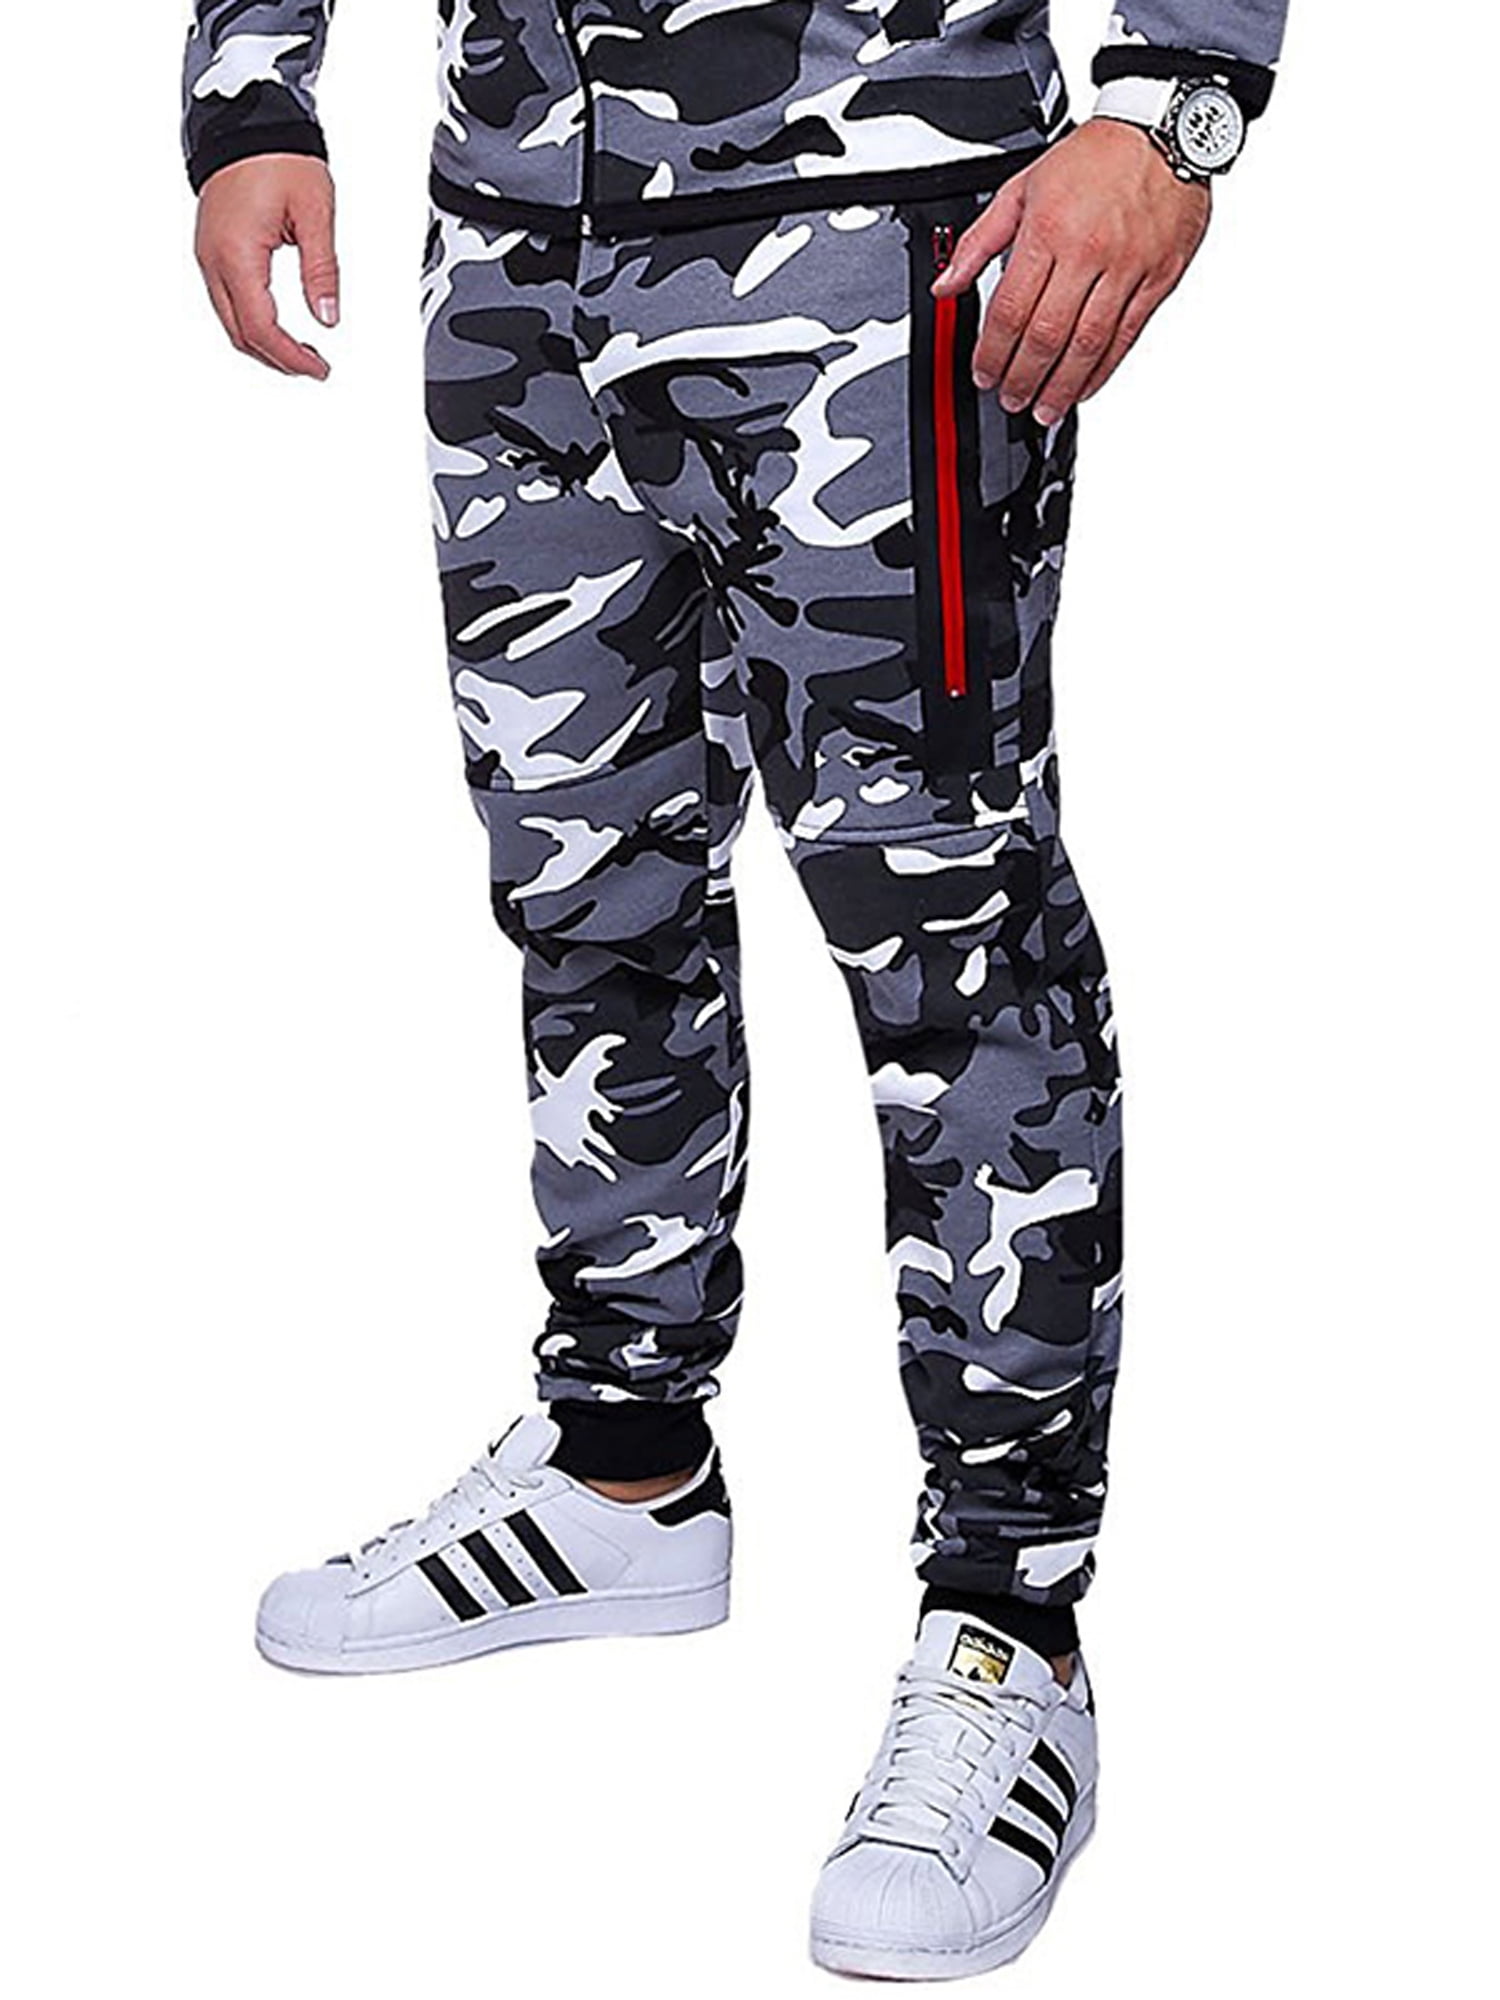 Mens Military Cargo Combat Trousers Joggers Camouflage Tracksuit Bottoms Pants 